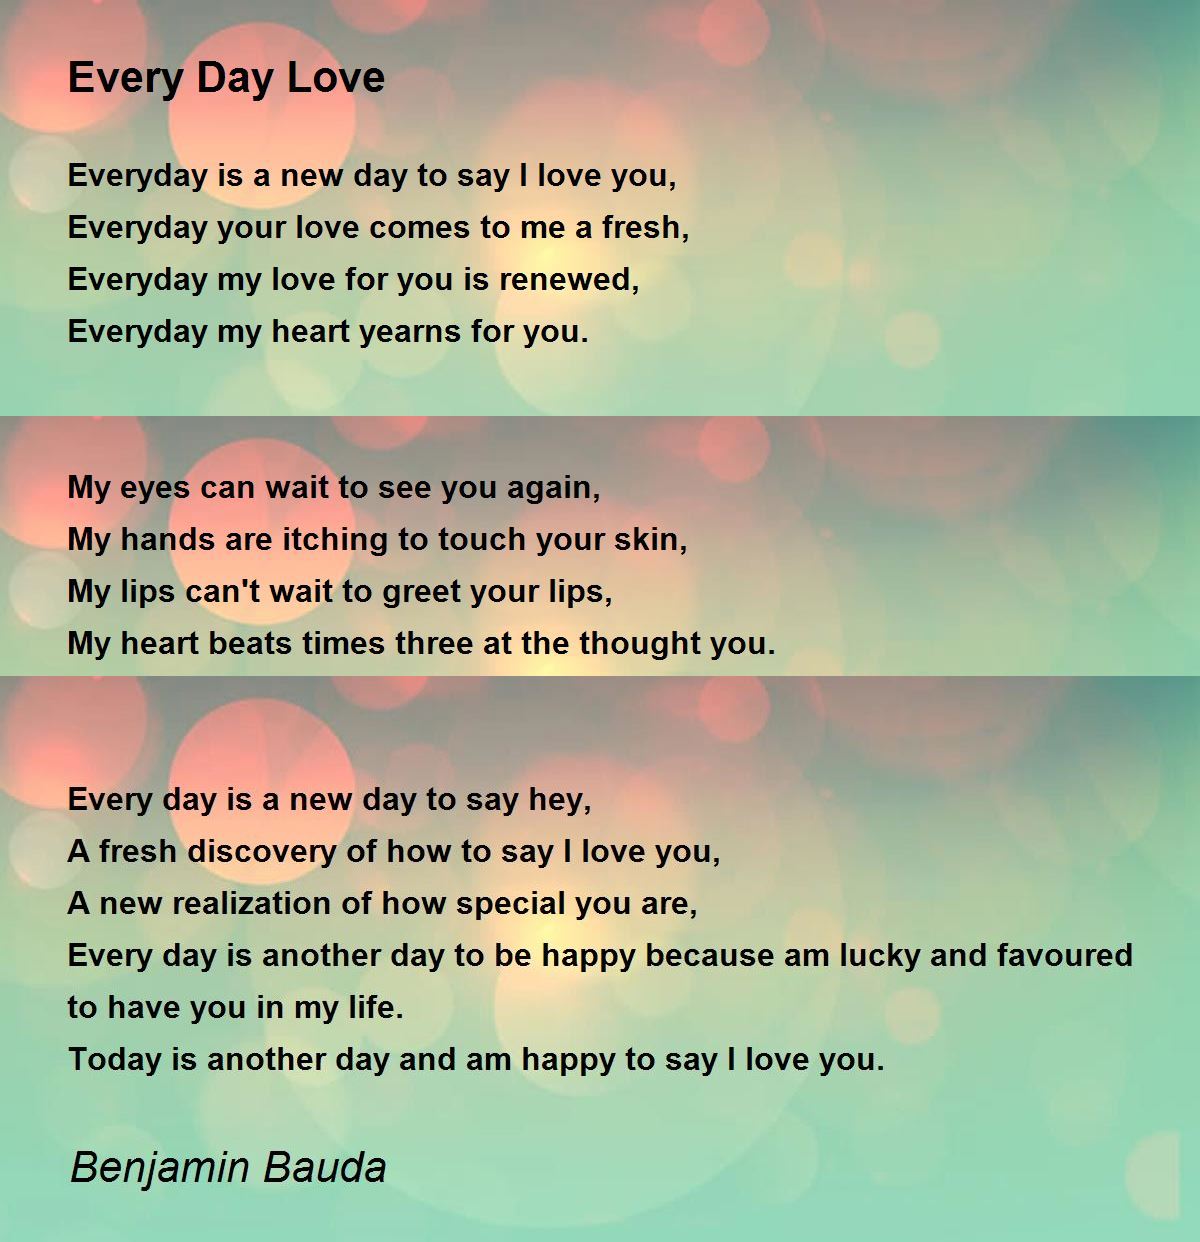 Every Day Love Every Day Love Poem By Benjamin Bauda